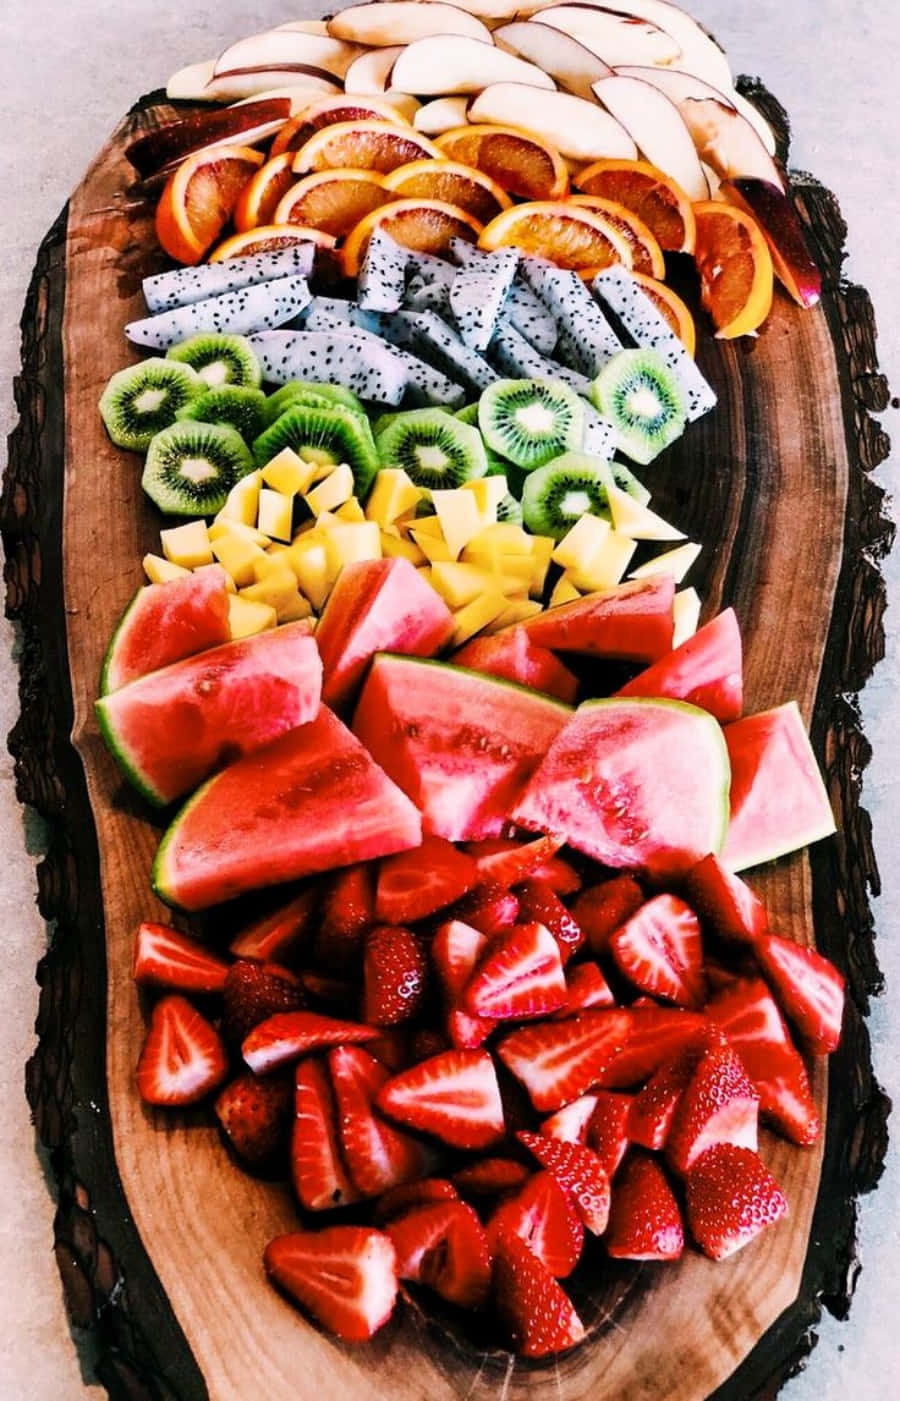 A Fruit Platter With A Variety Of Fruits On It